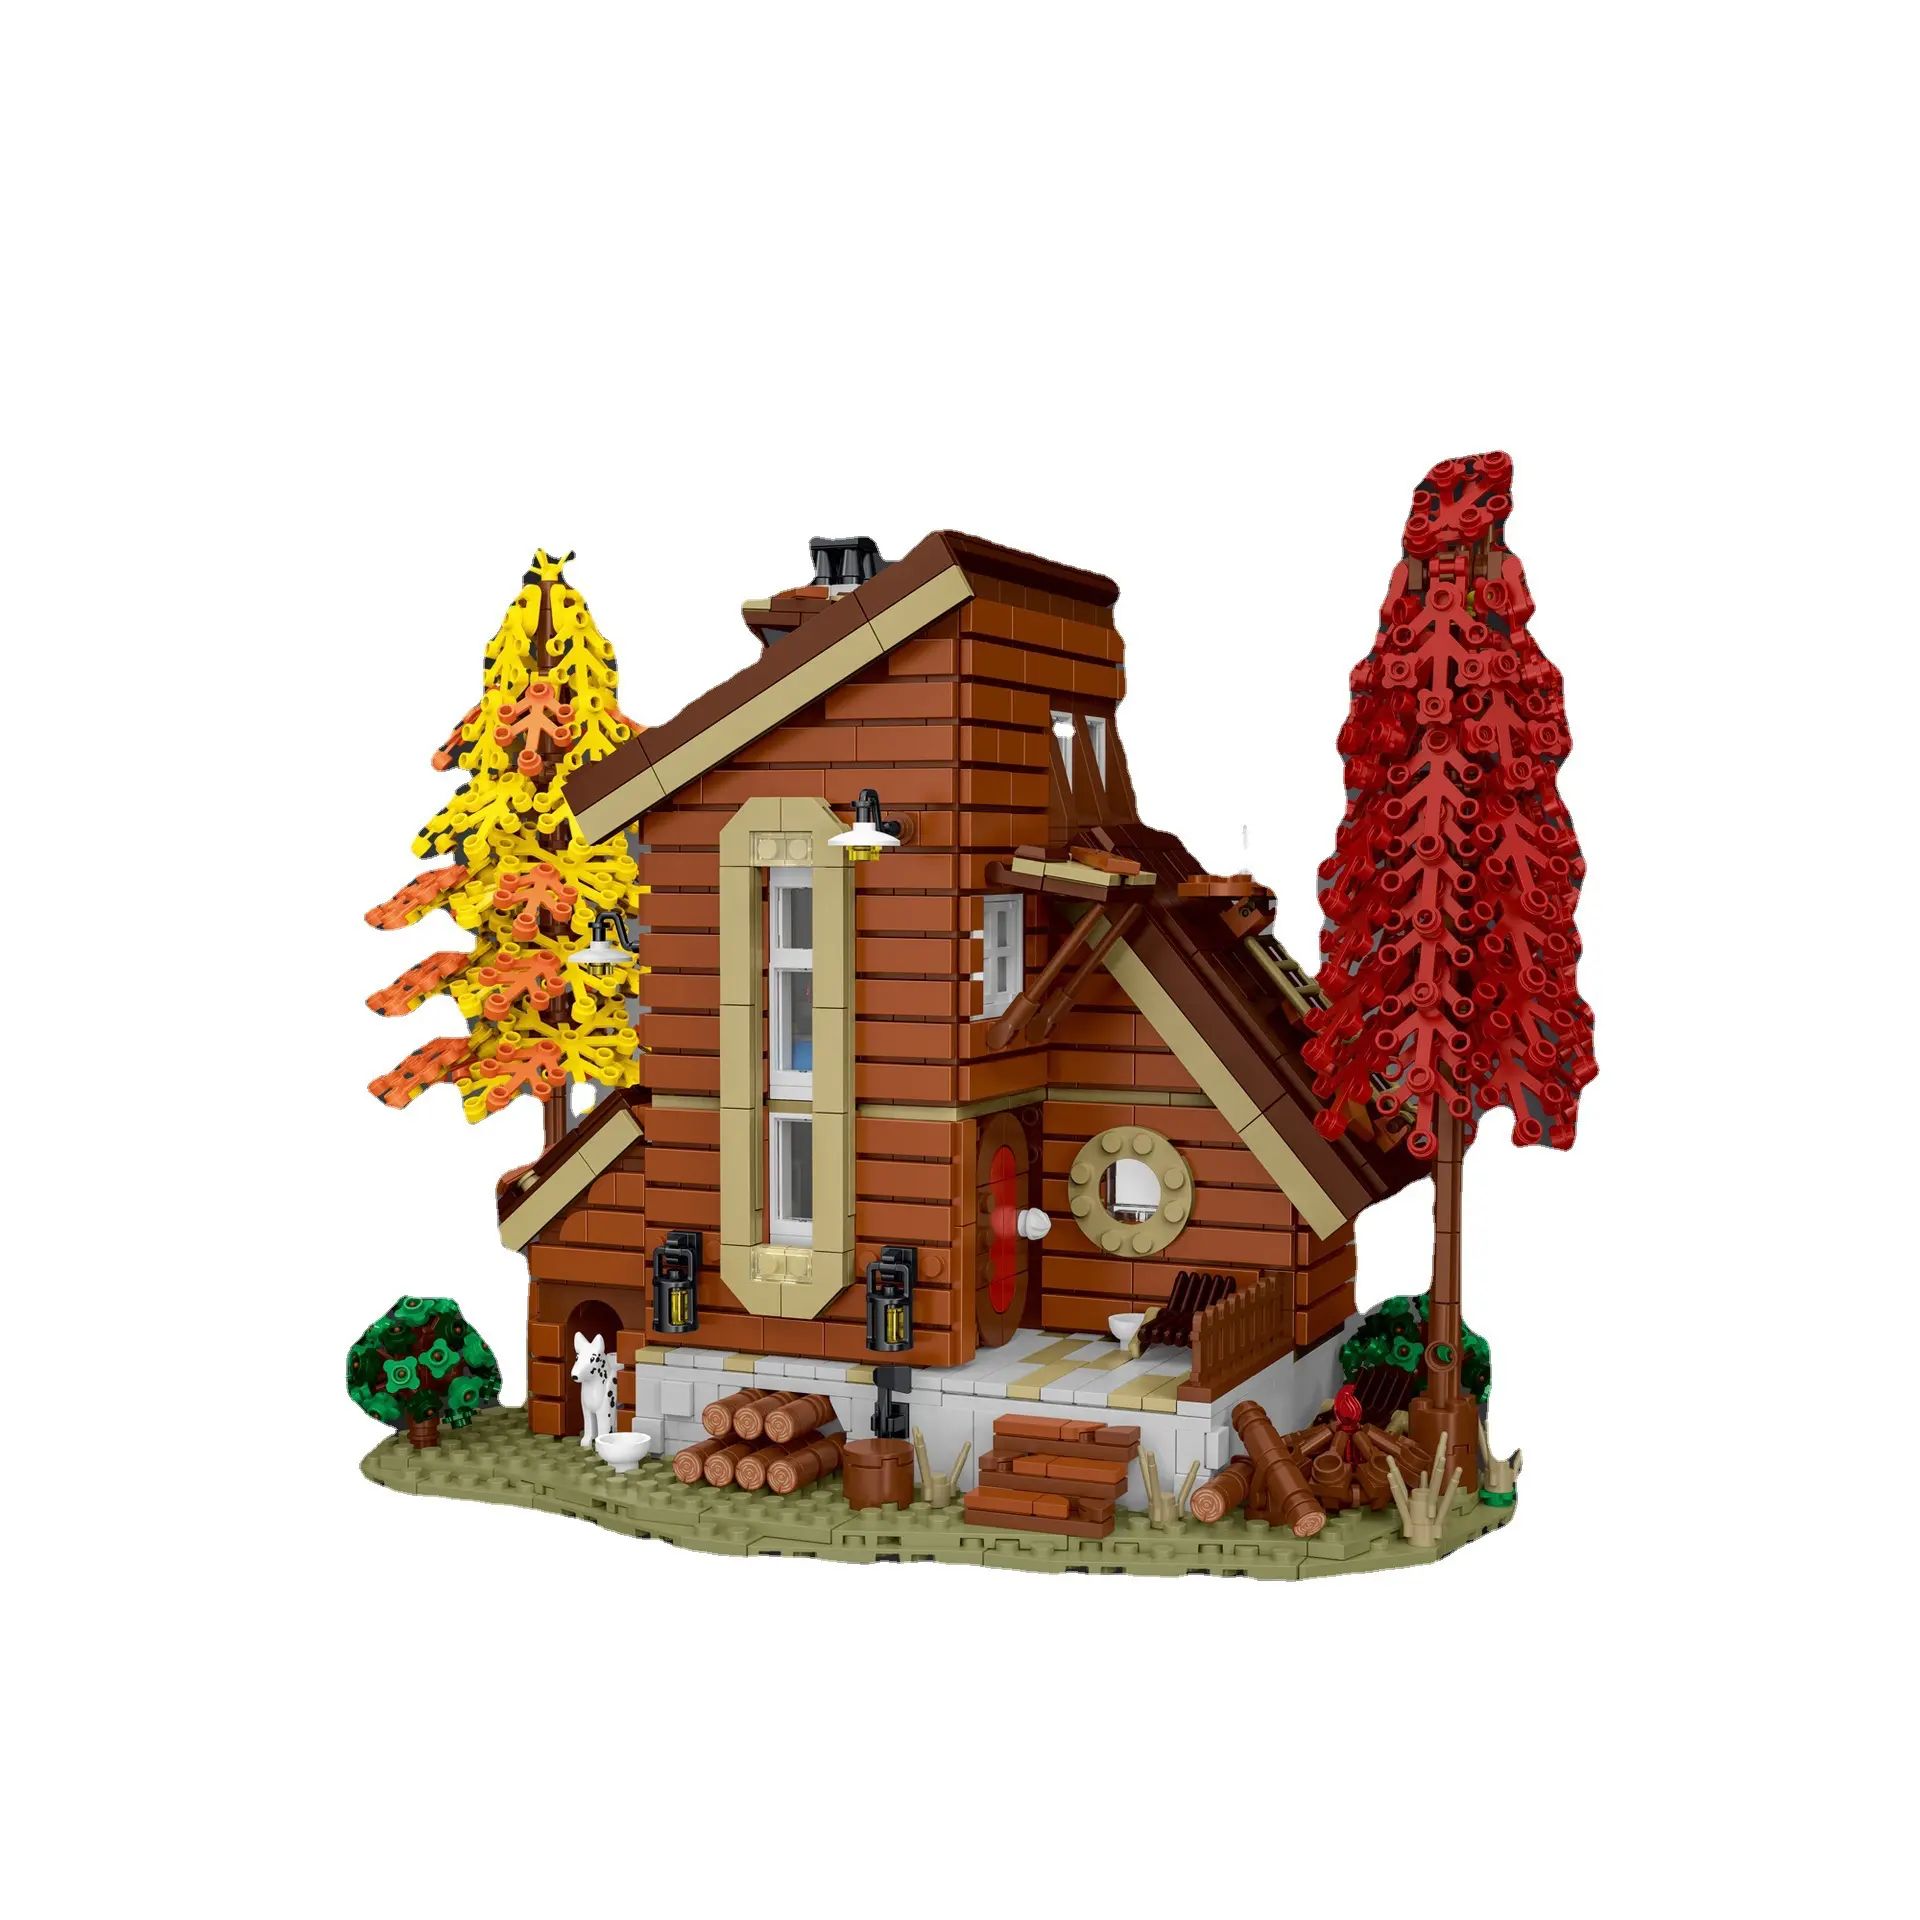 MORK 031071-73 Forest Wooden House Series stack block Creative Expert Street View Building block for kids house toy bricks